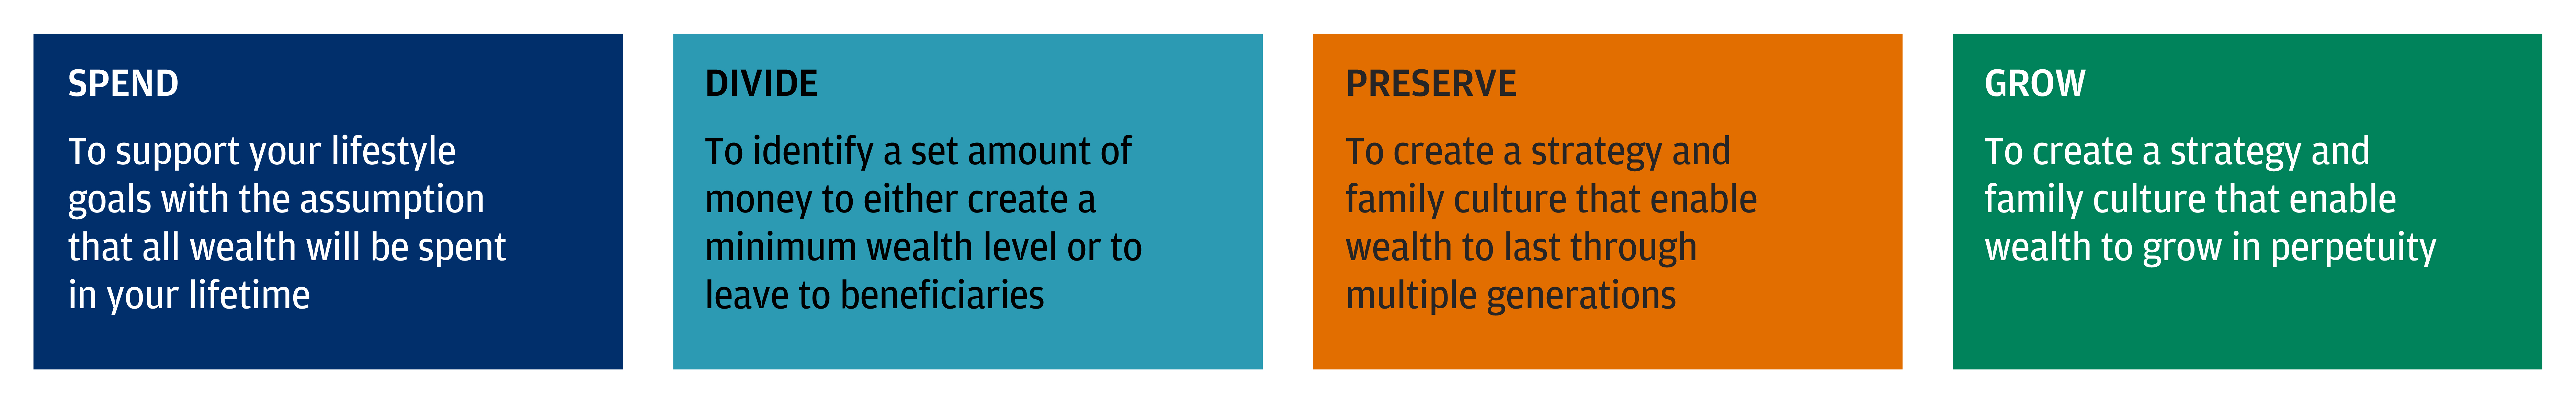 The graphic shows the four foundational intents for wealth—Spend, Divide, Preserve and Grow.